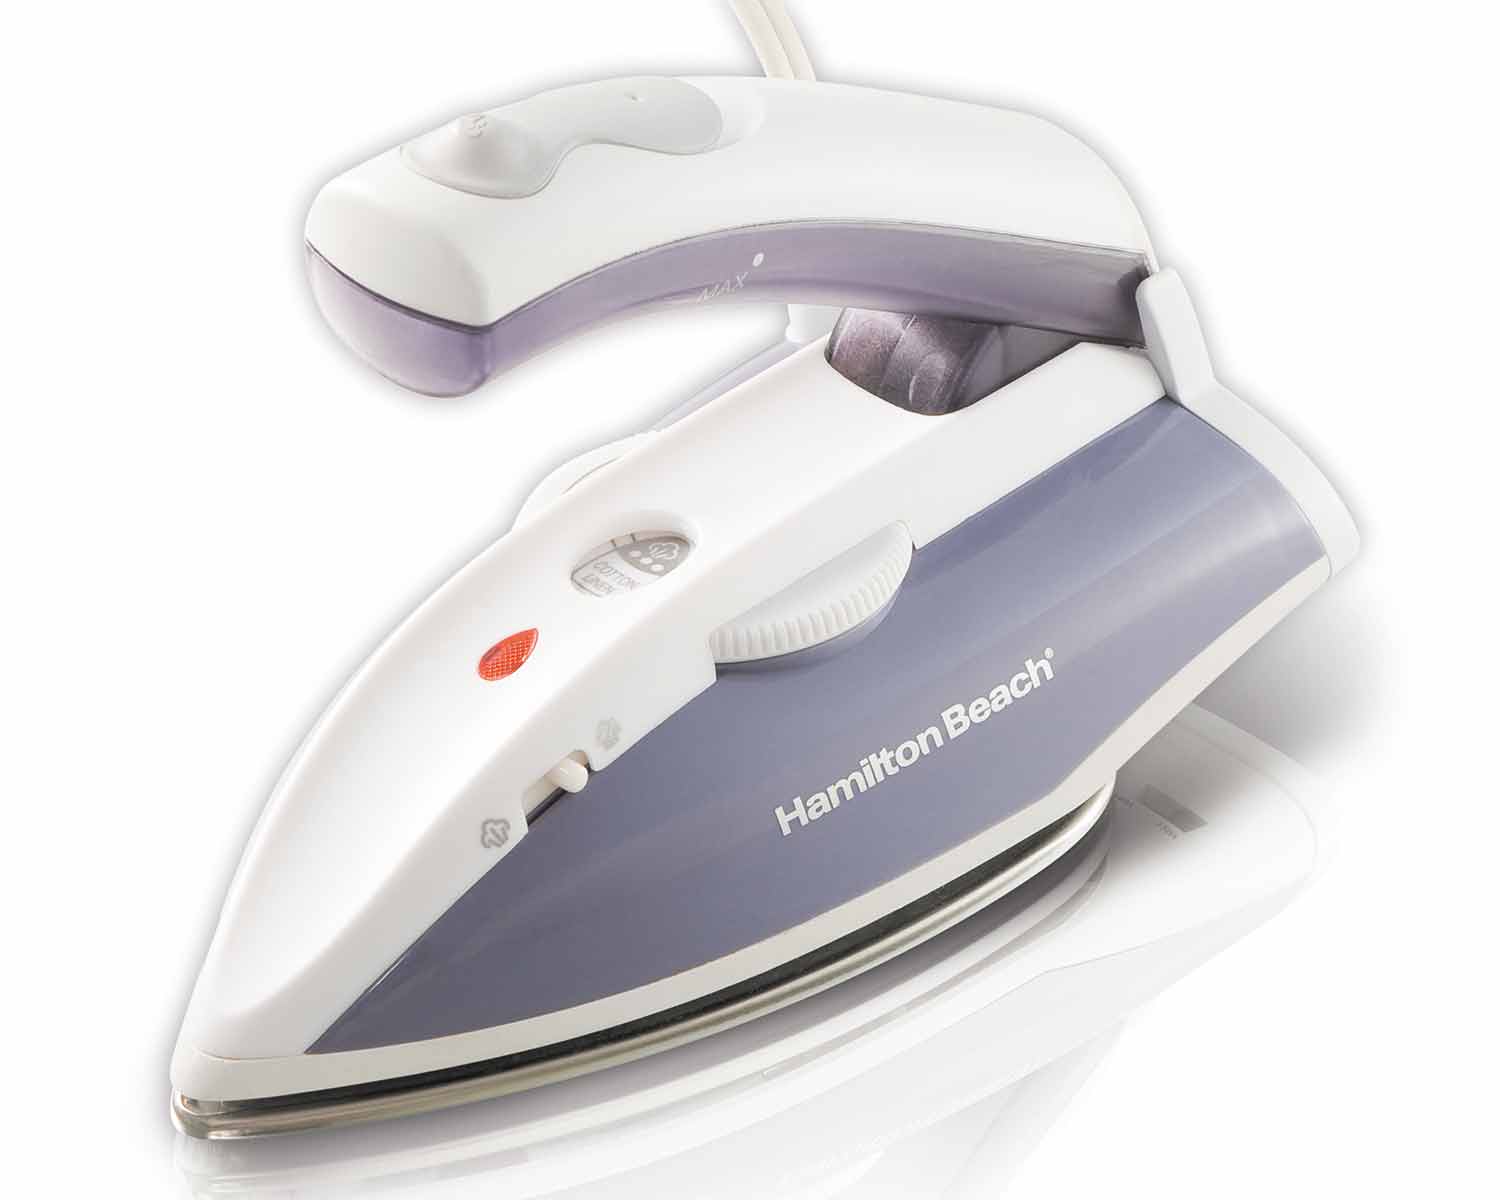 Travel Iron and Steamer (10092)